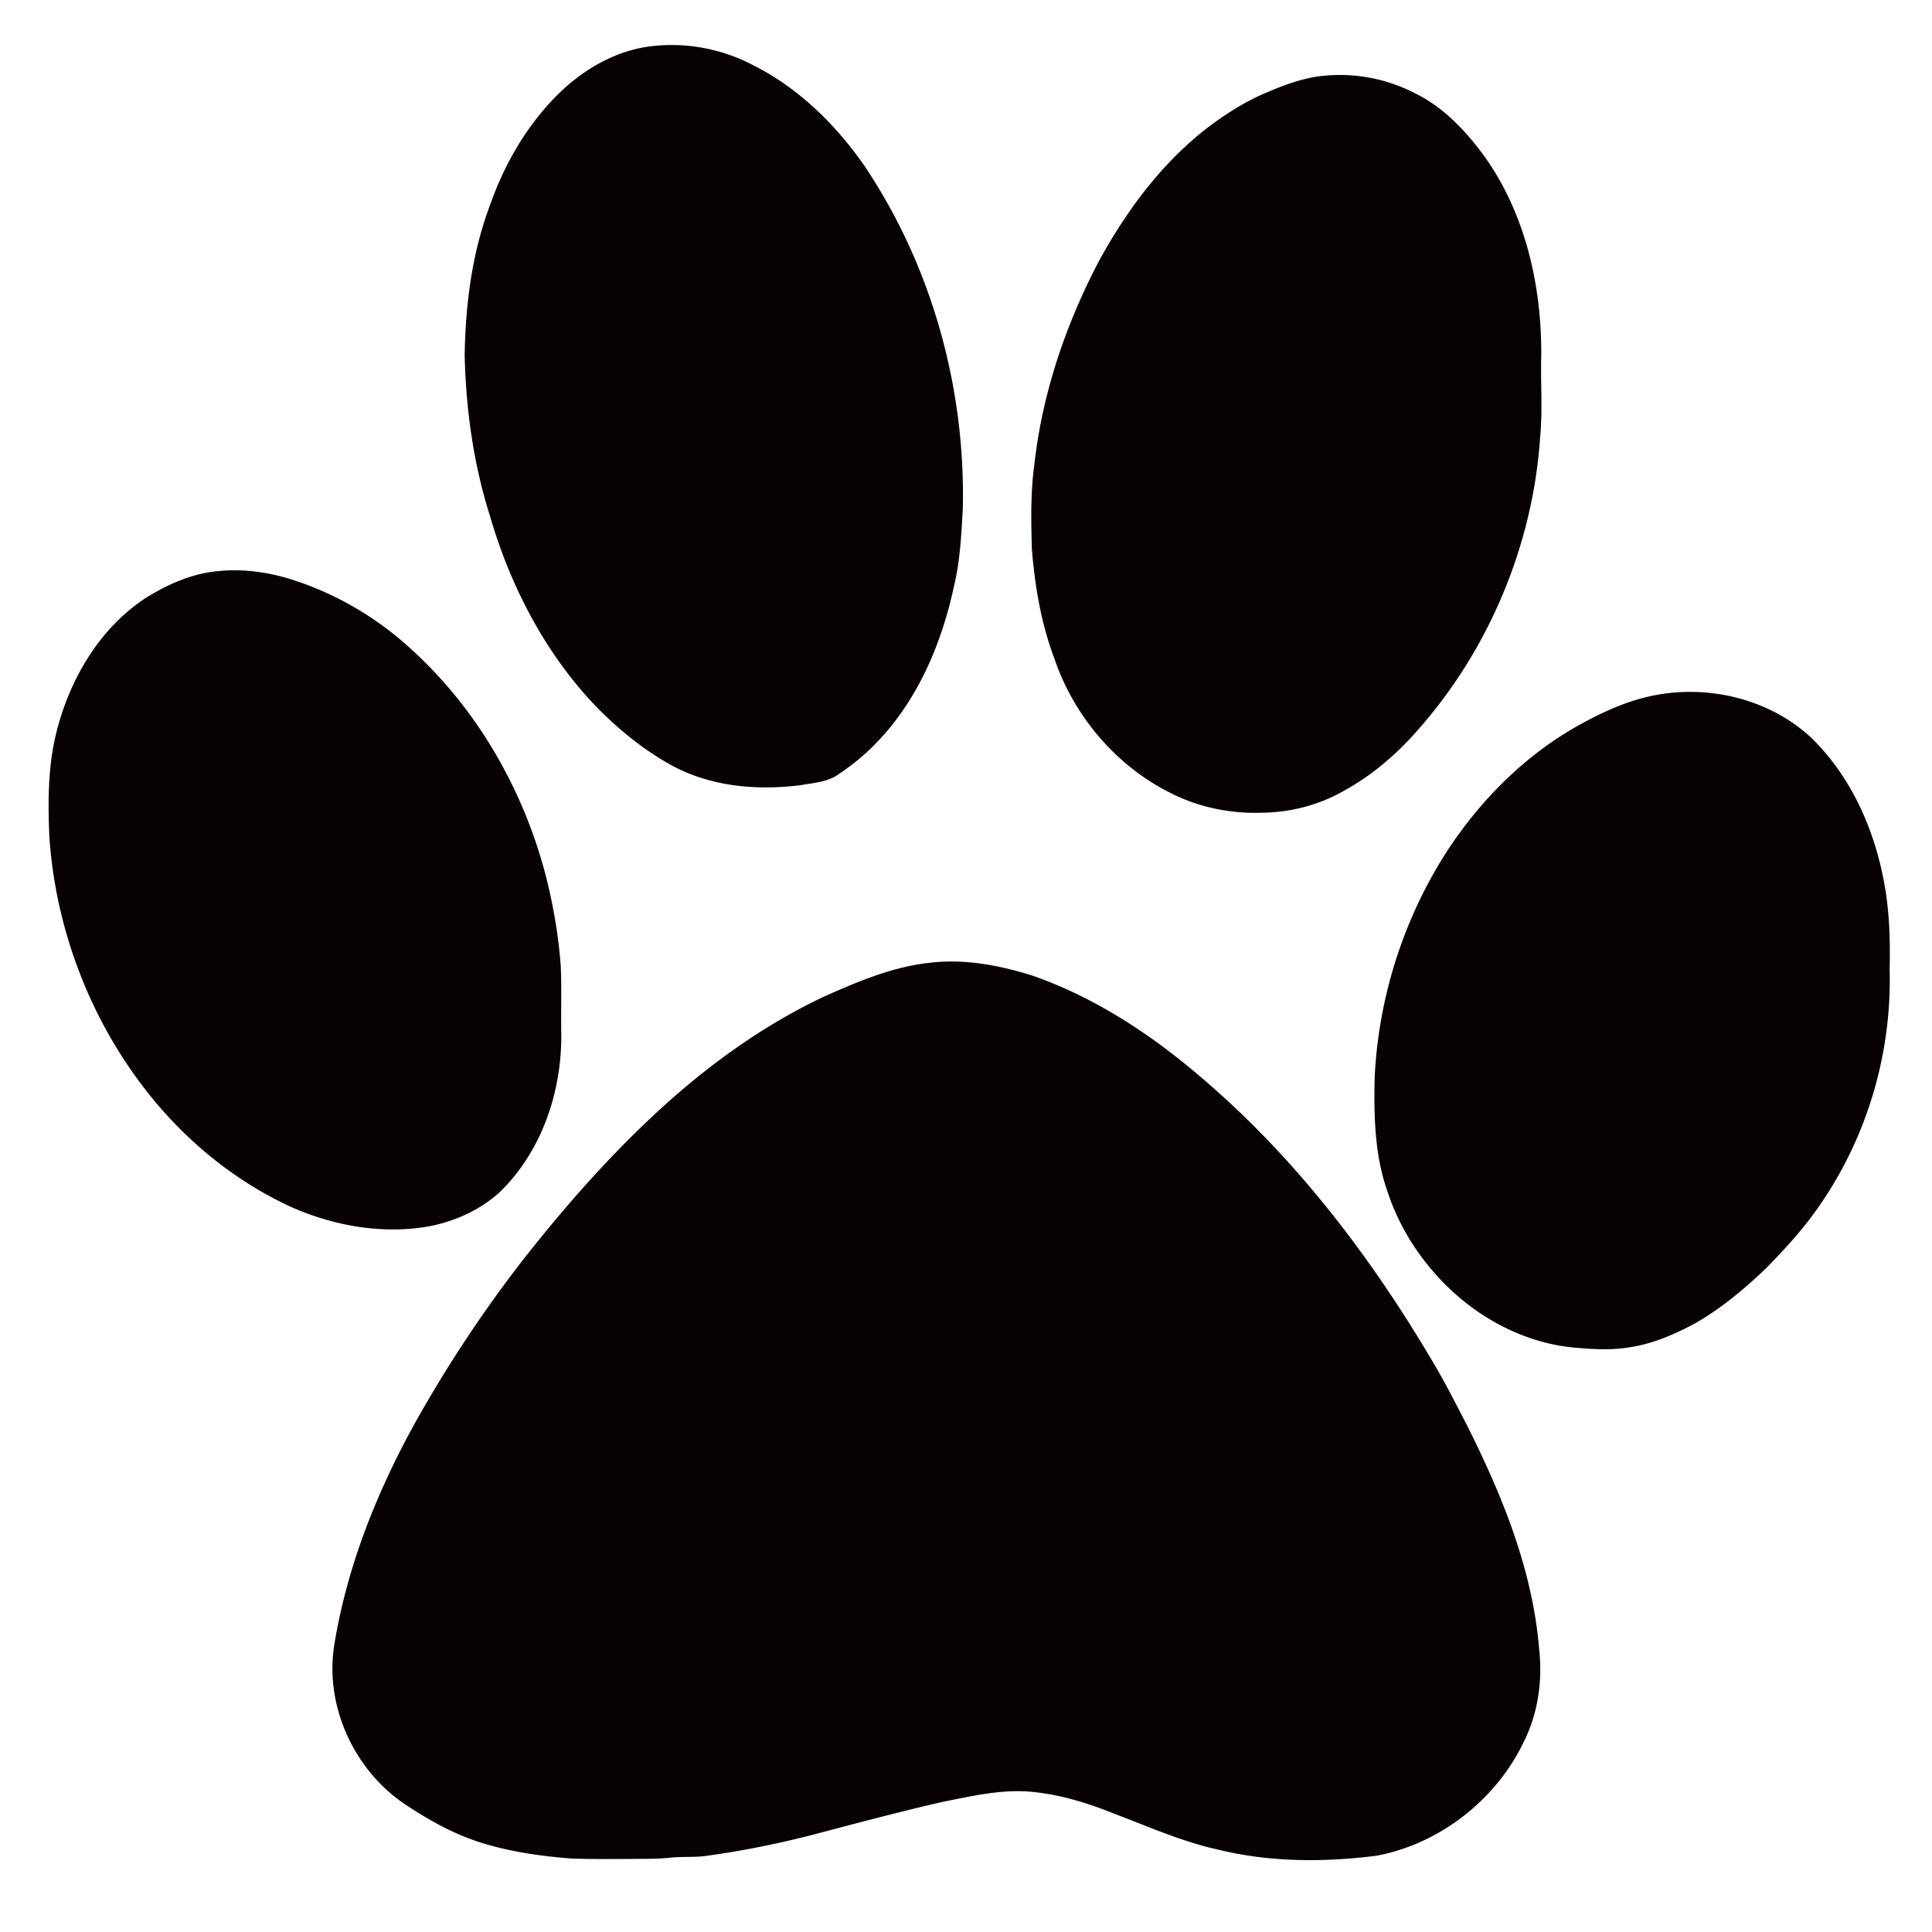 Clipart Of Dog Paws